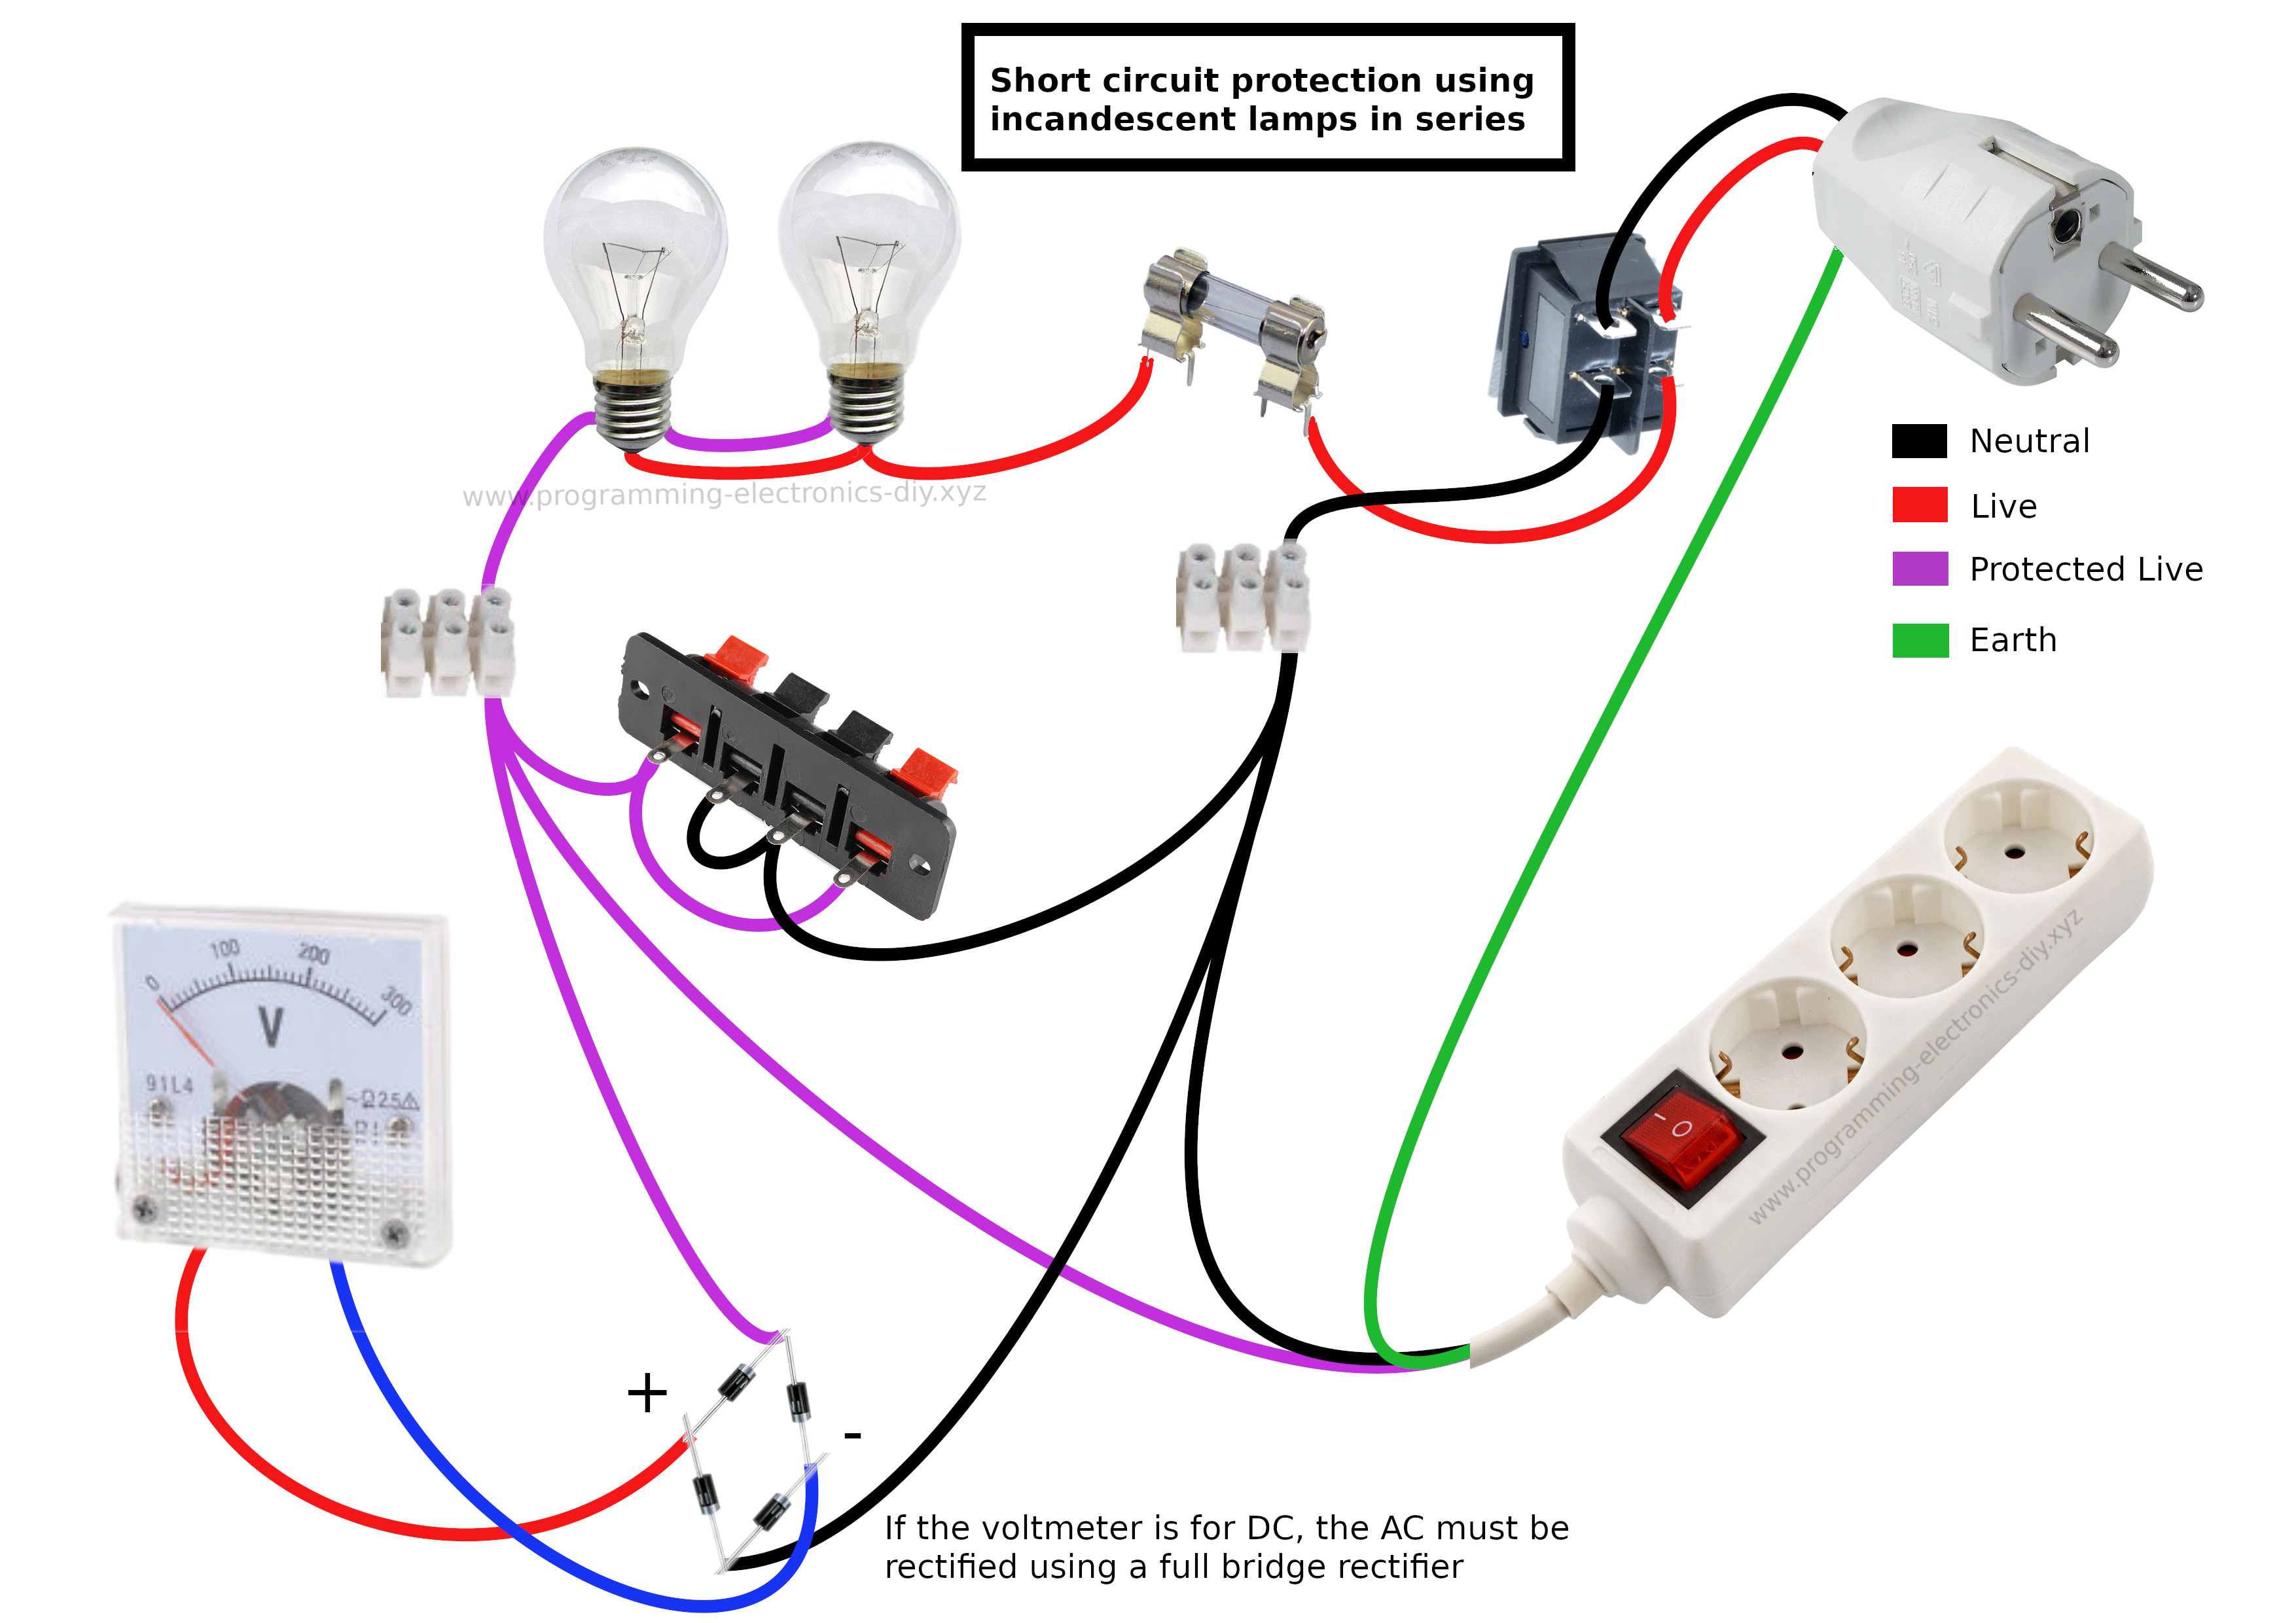 Mains short circuit protection, current limiter using incandescent